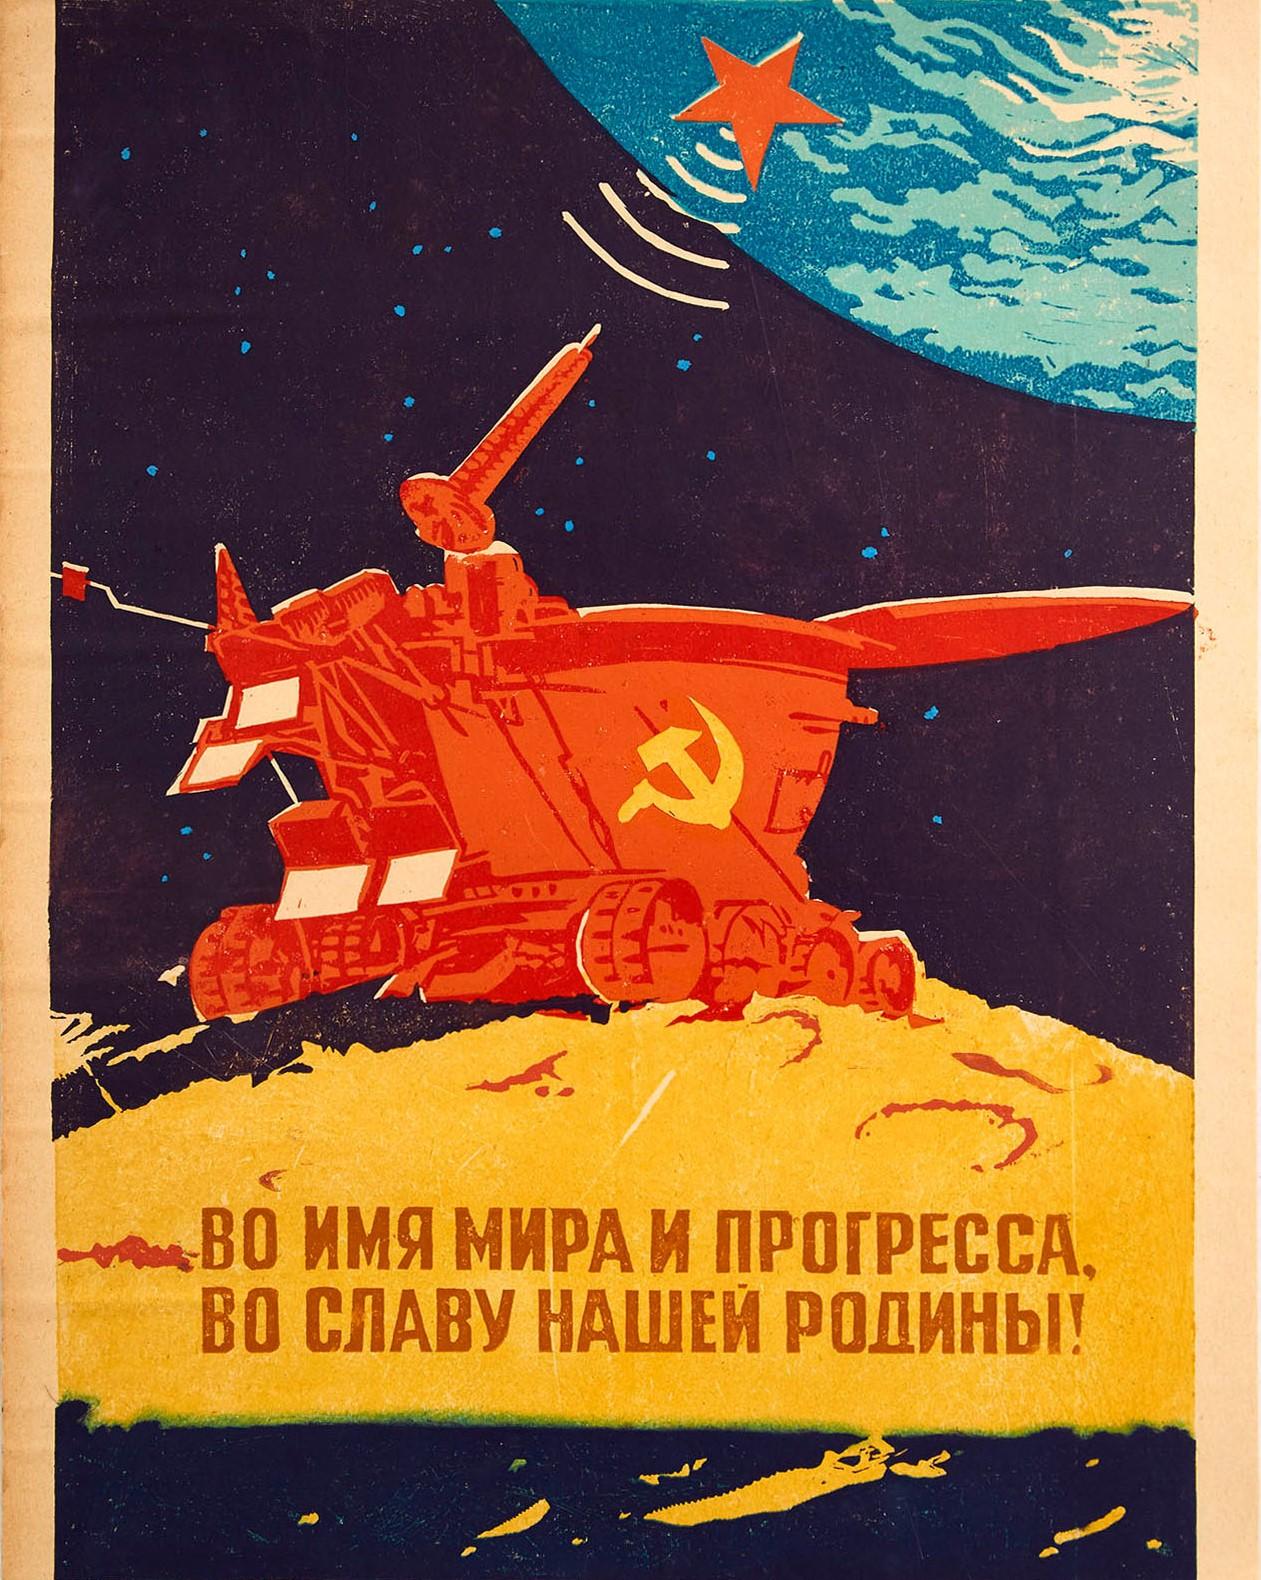 Original vintage Soviet propaganda poster - In the Name of Peace and Progress For the Glory of Our Motherland! - featuring a great design depicting a Lunokhod / Moonwalker rover on the moon with its helical antenna sending a signal to a red star on